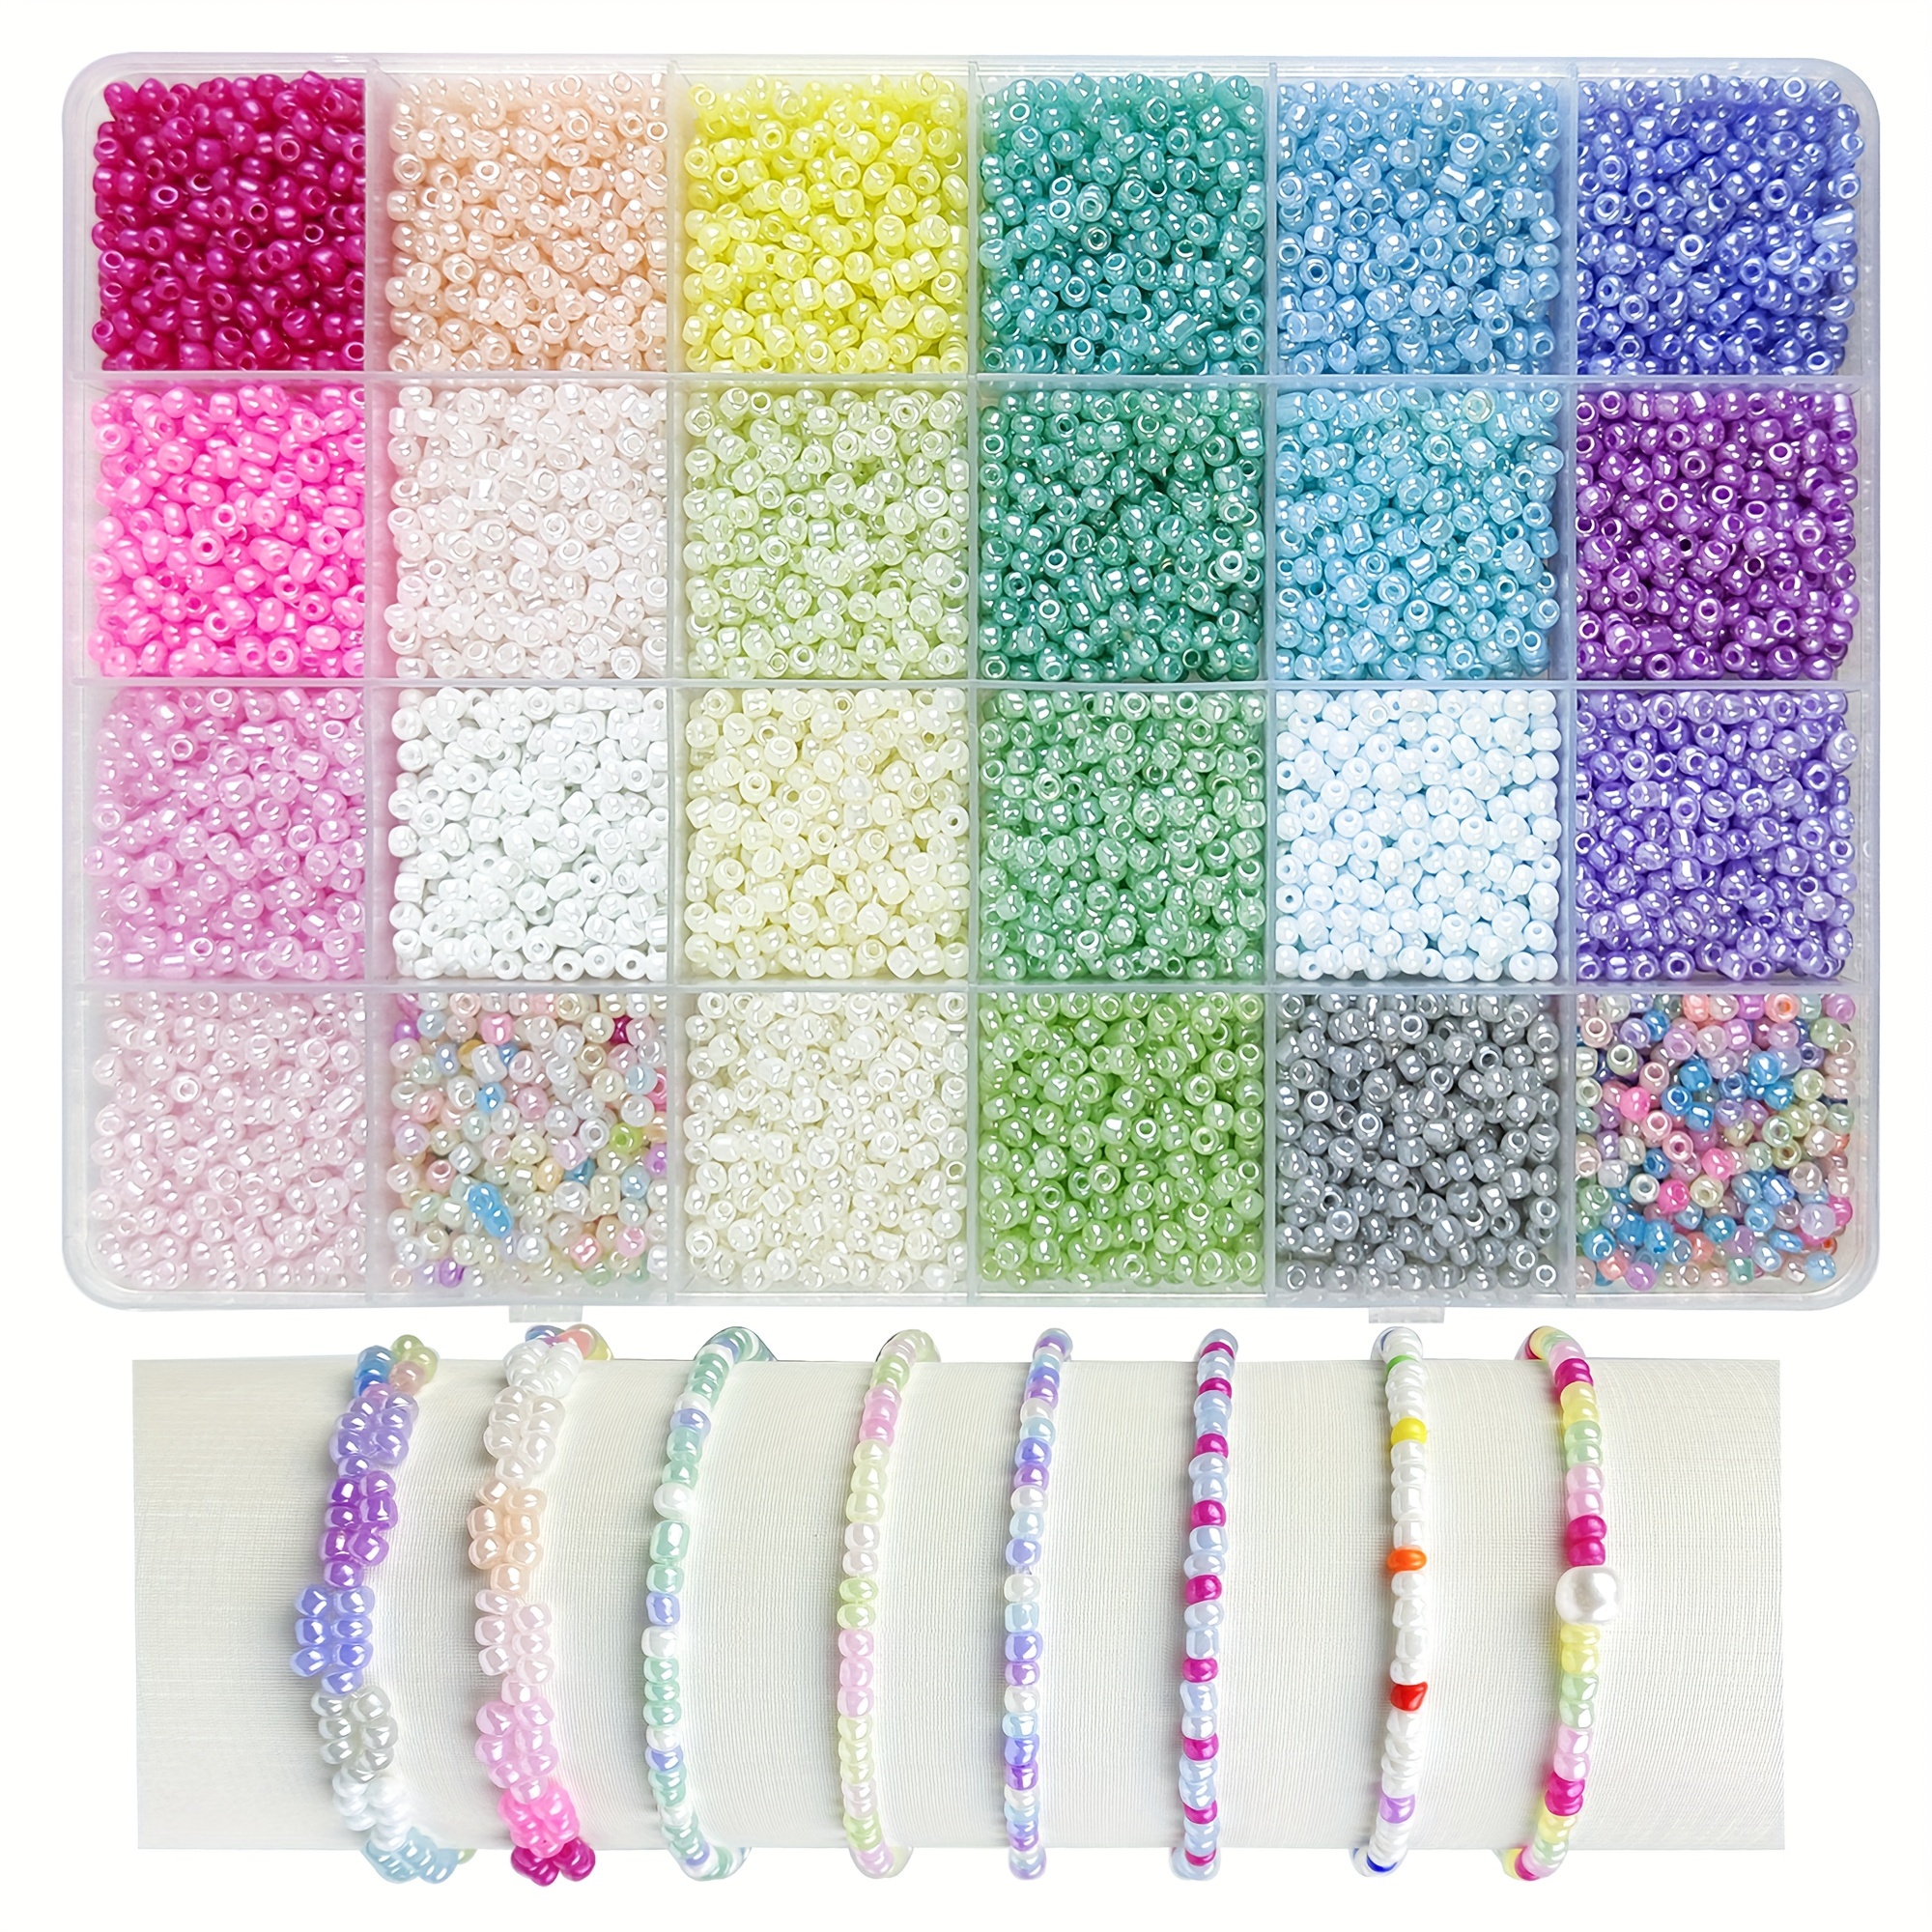 

8600pcs 24 Colors 3mm Glass Rice Beads Kit For Diy Fashion Bracelet Necklace Jewelry Making Gift Puzzle Game Beaded Accessories